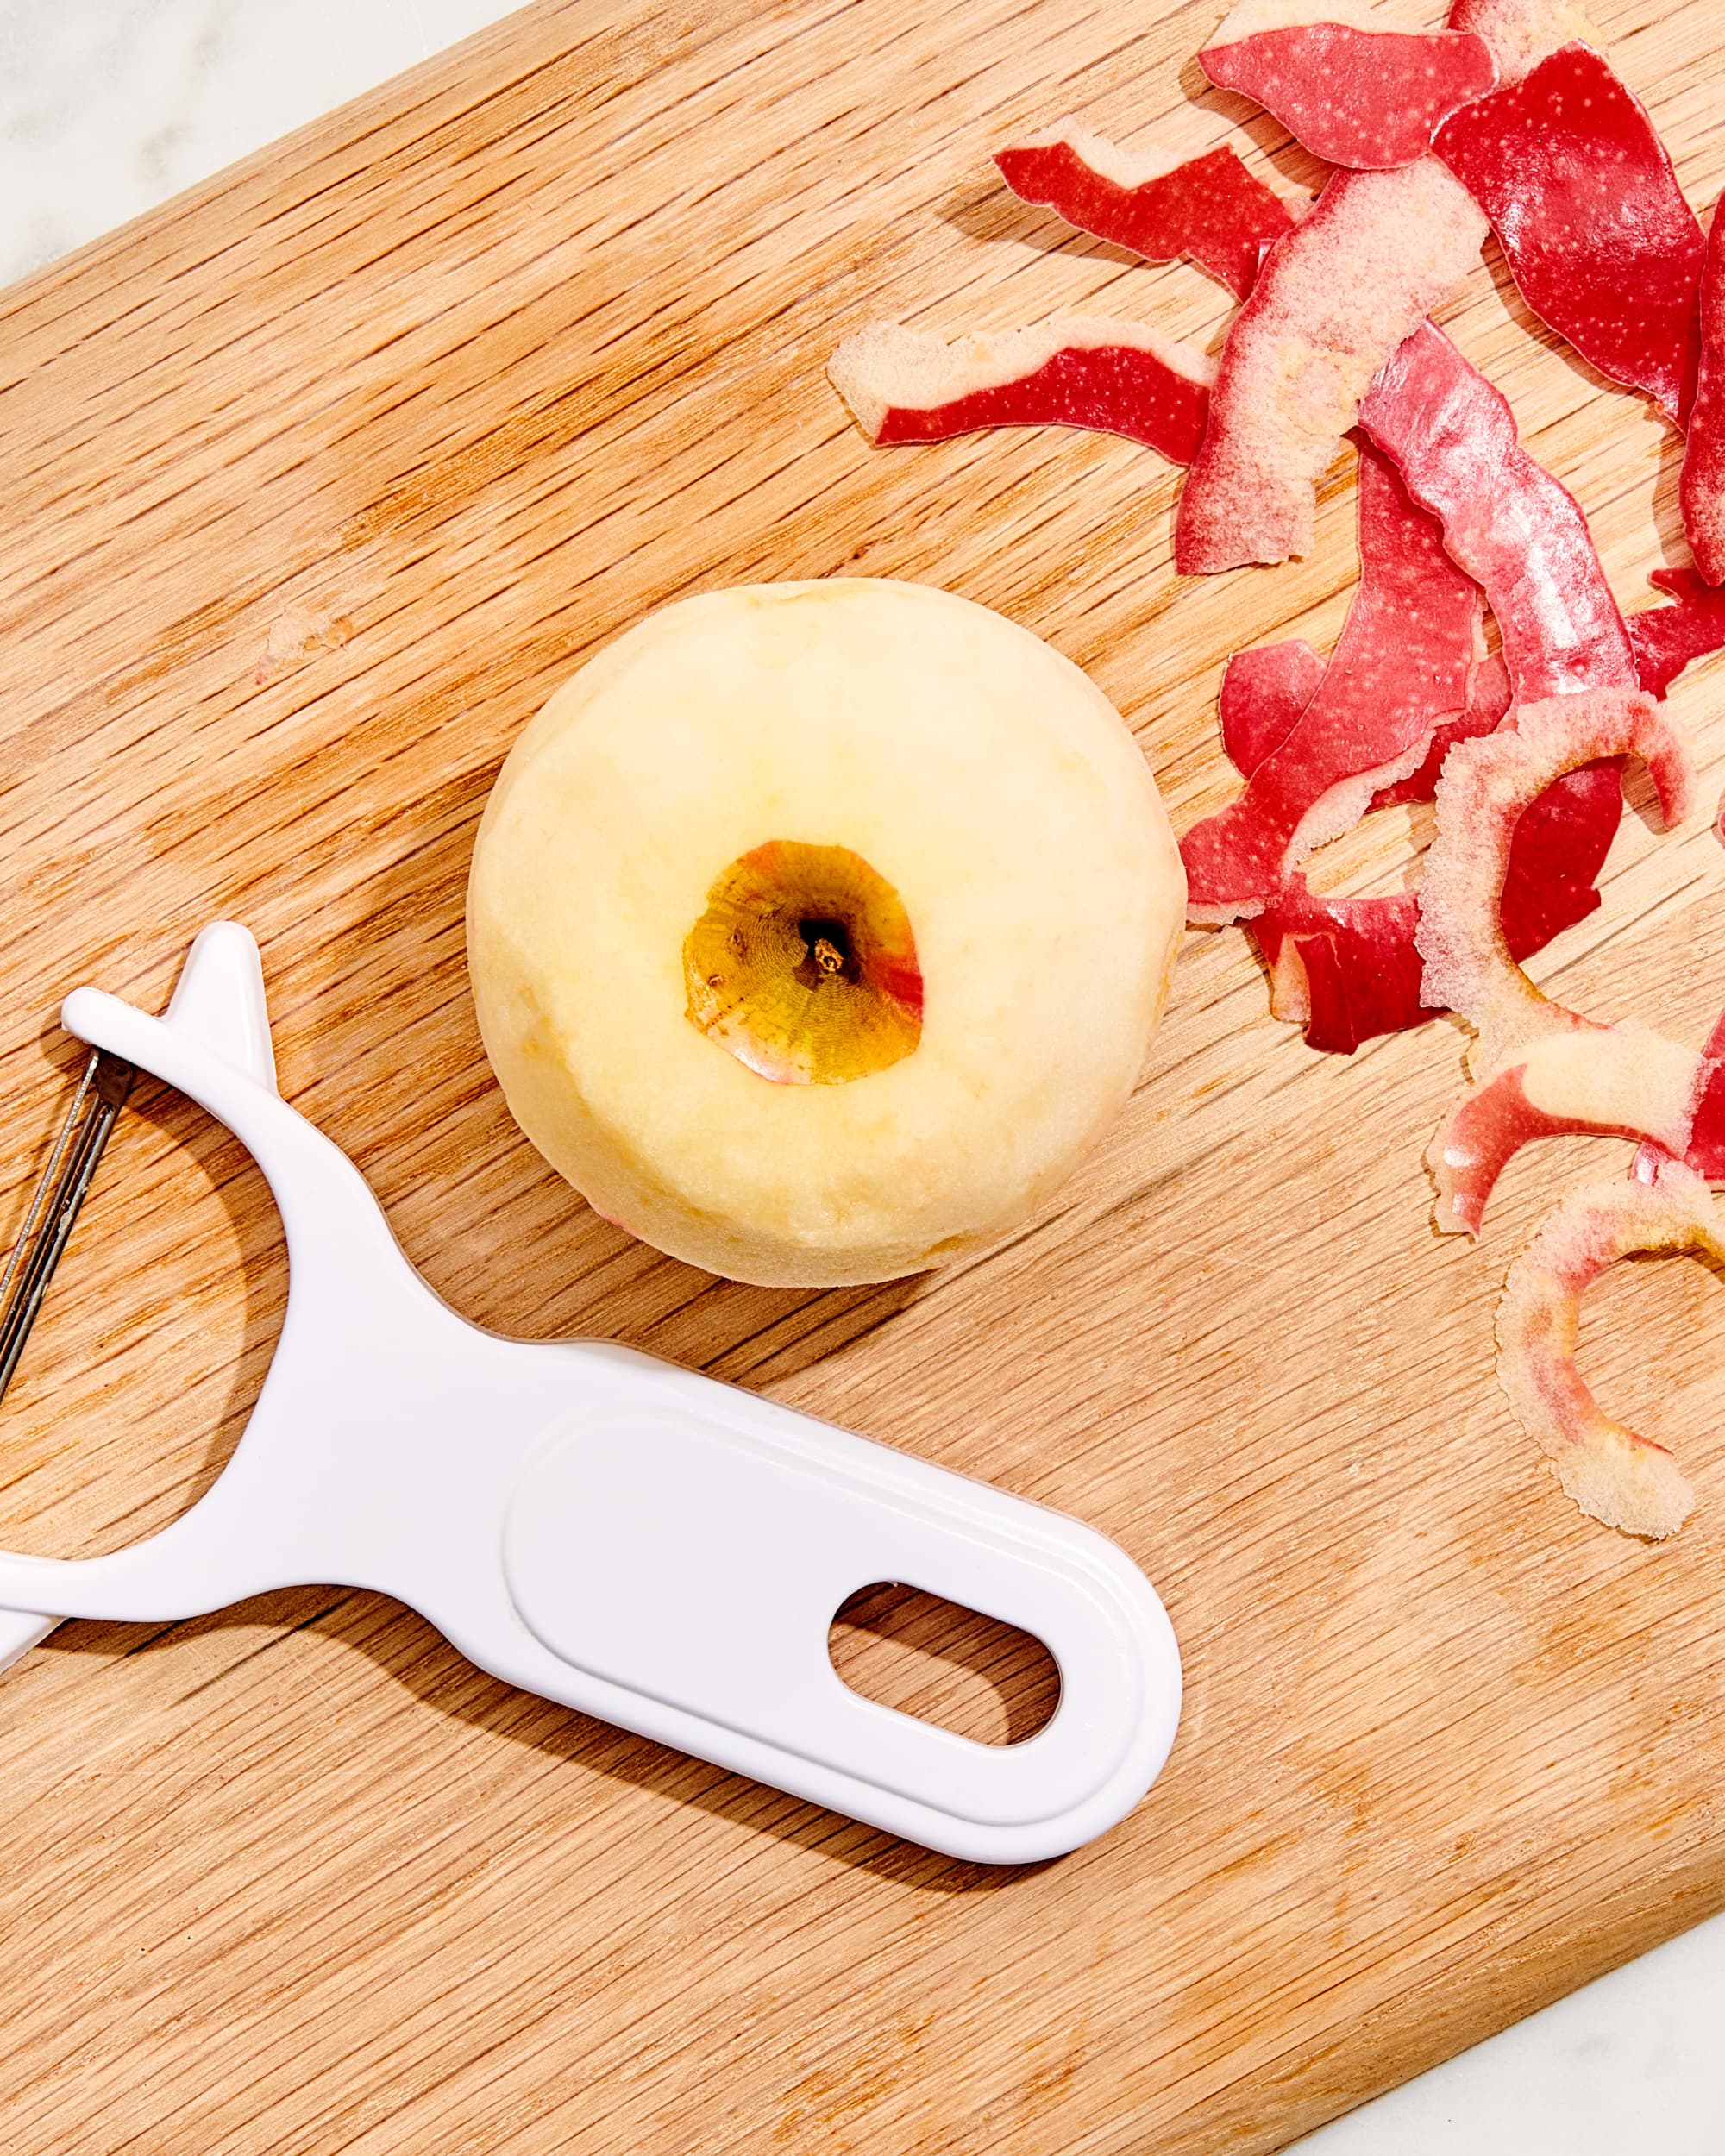 How to Peel an Apple: A Step-by-Step Guide